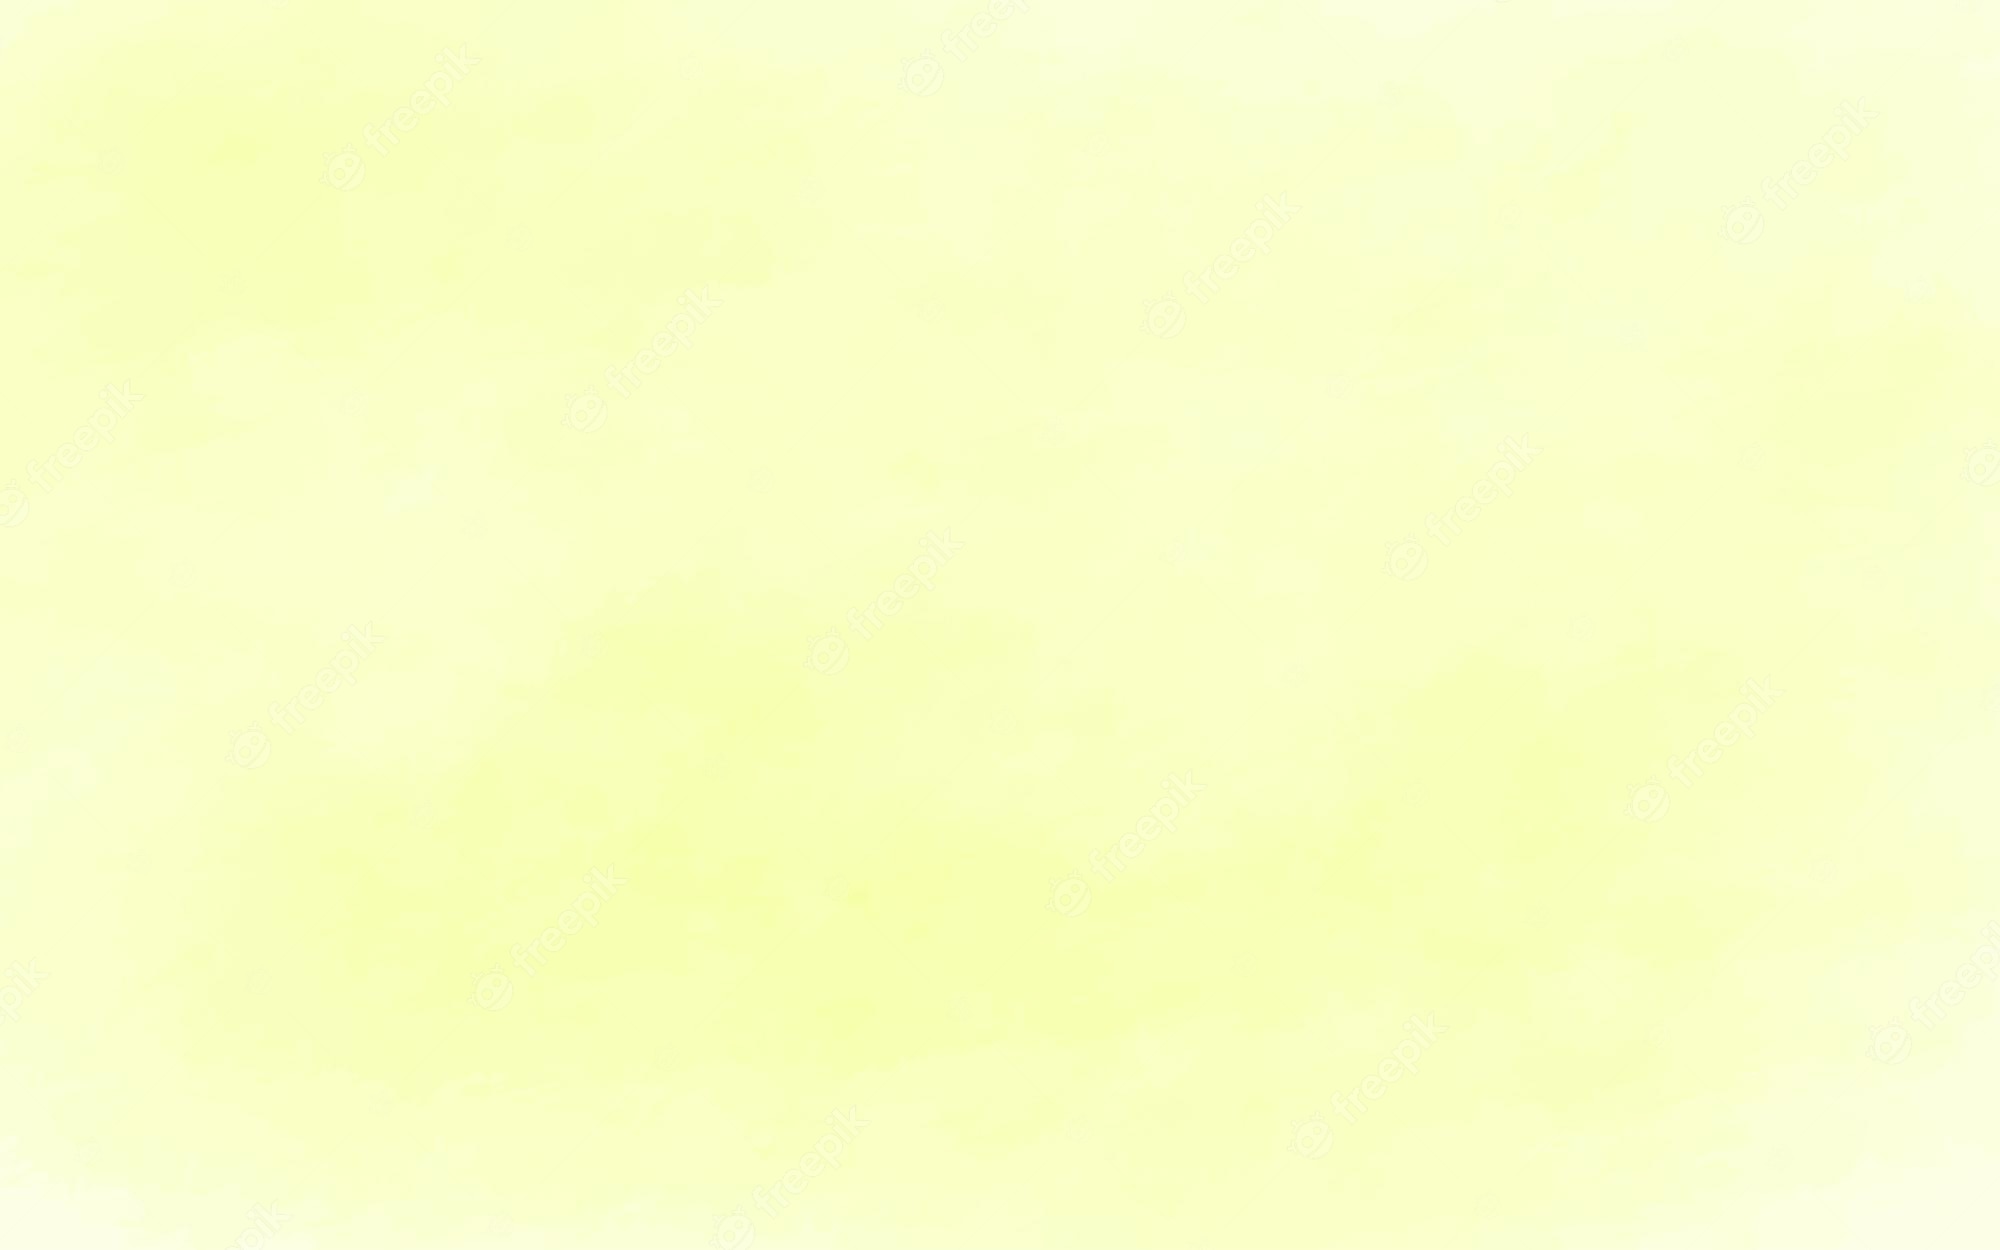 A yellow background with white clouds - Light yellow